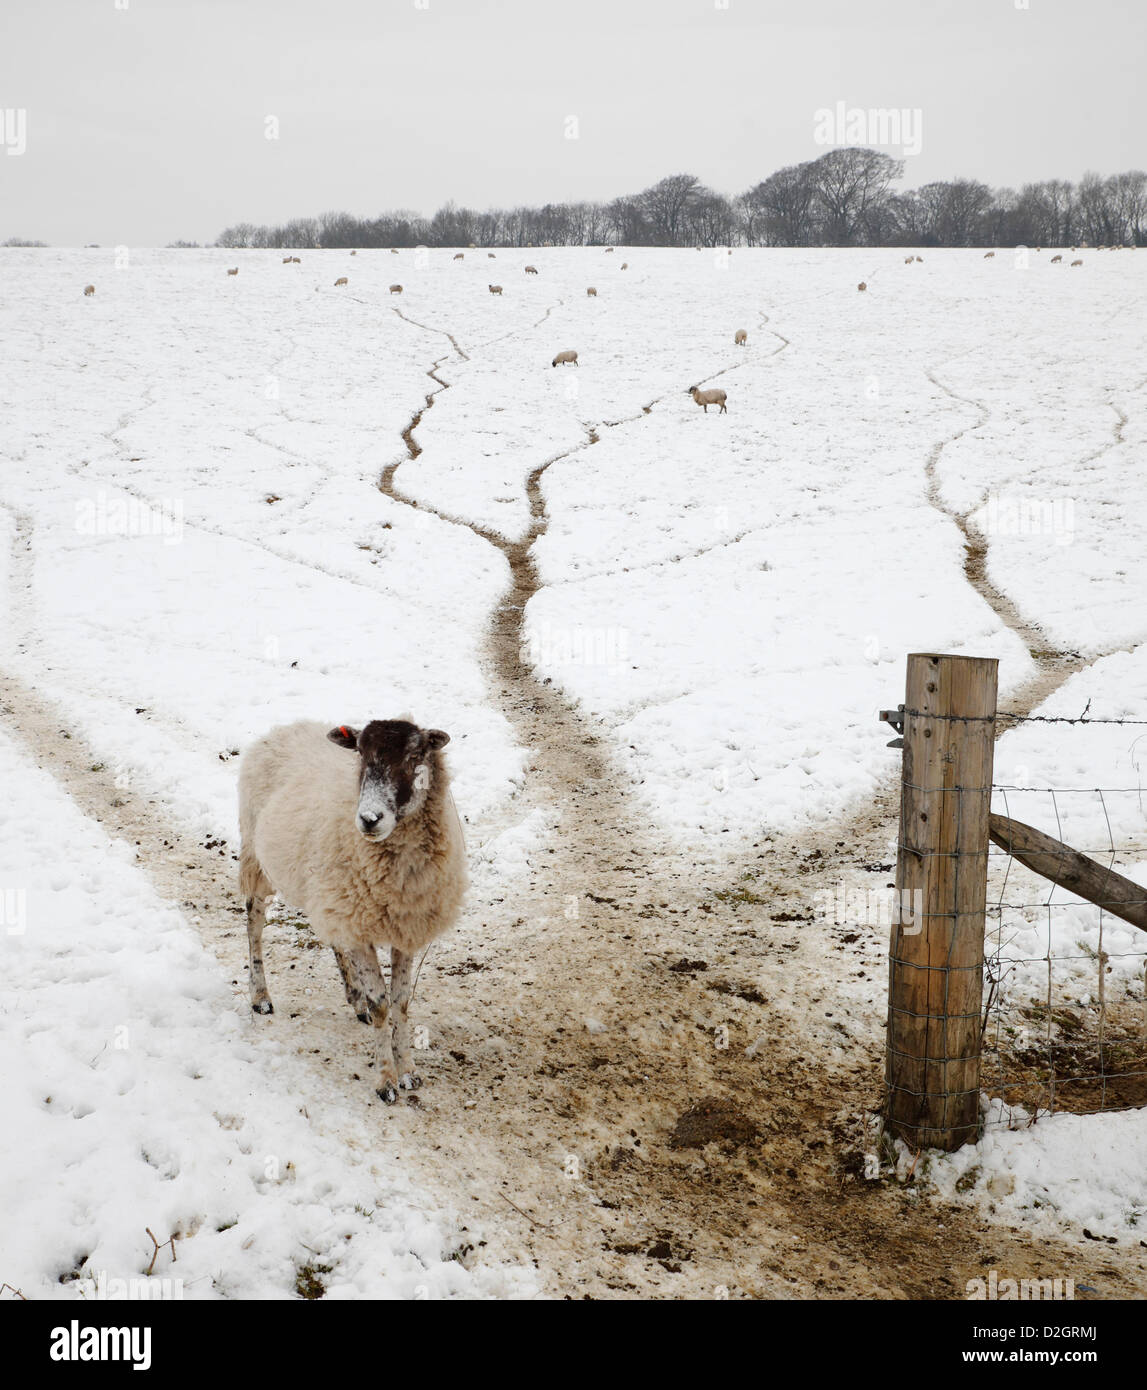 23rd January 2013. Field of sheep struggling with the snow in winter weather conditions. North Downs, Biggin Hill, Kent, England, UK. Stock Photo